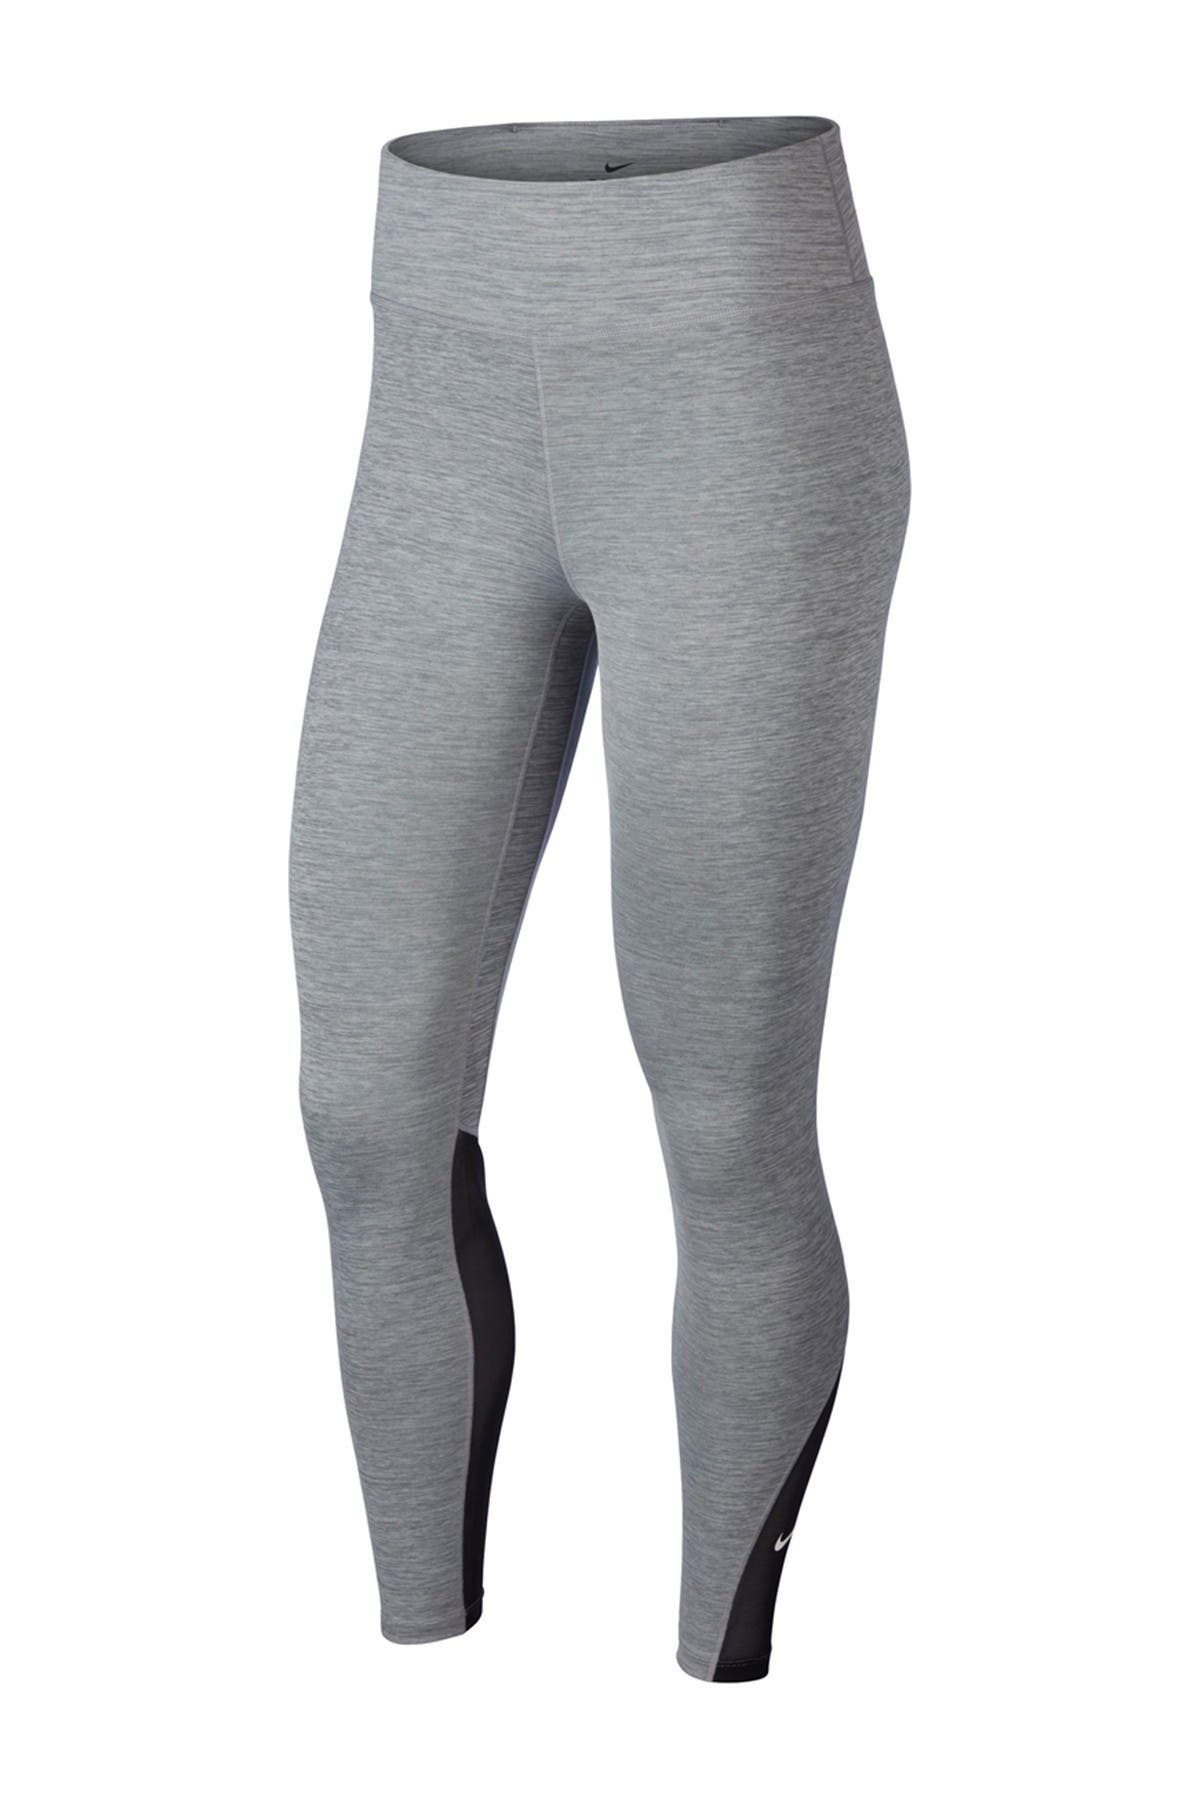 Nike | One 7/8 Tights | Nordstrom Rack